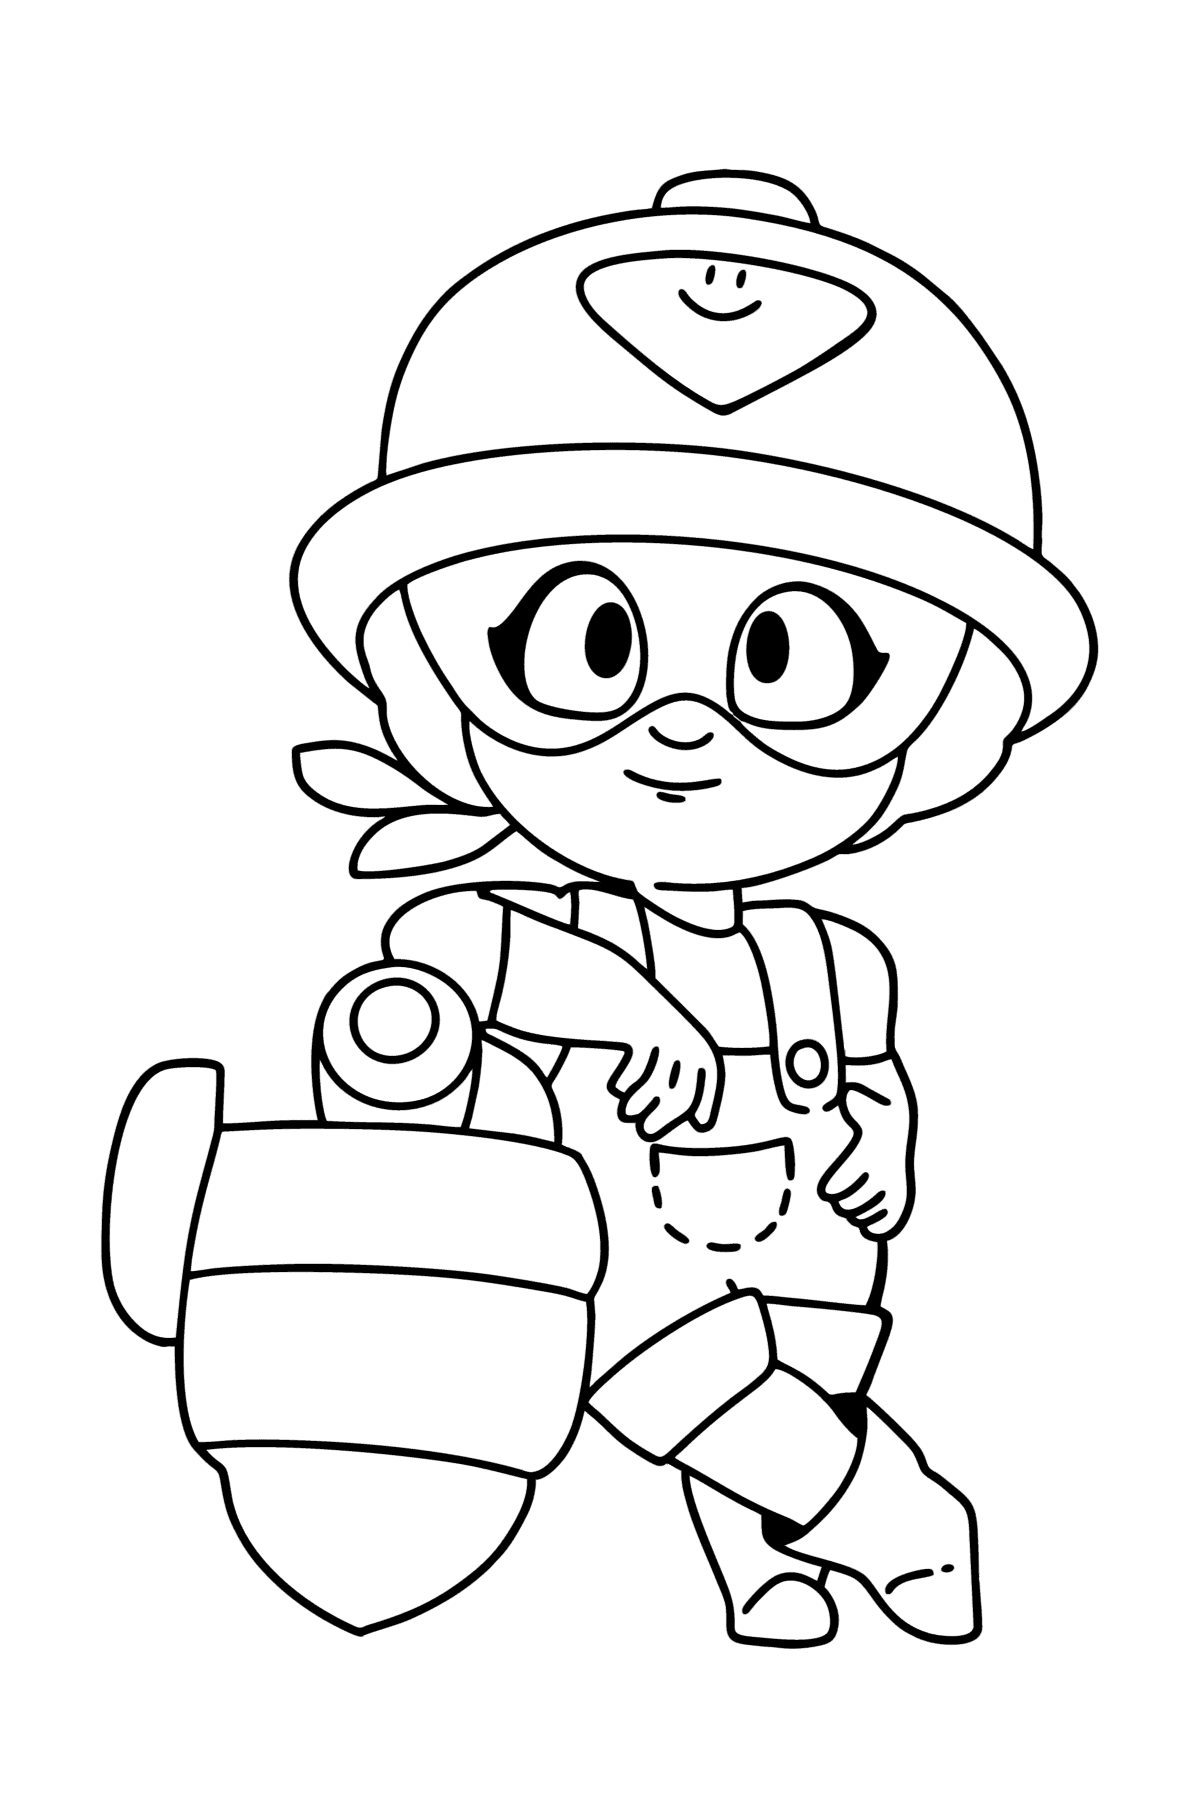 Brawl Stars Jacky coloring page - Coloring Pages for Kids